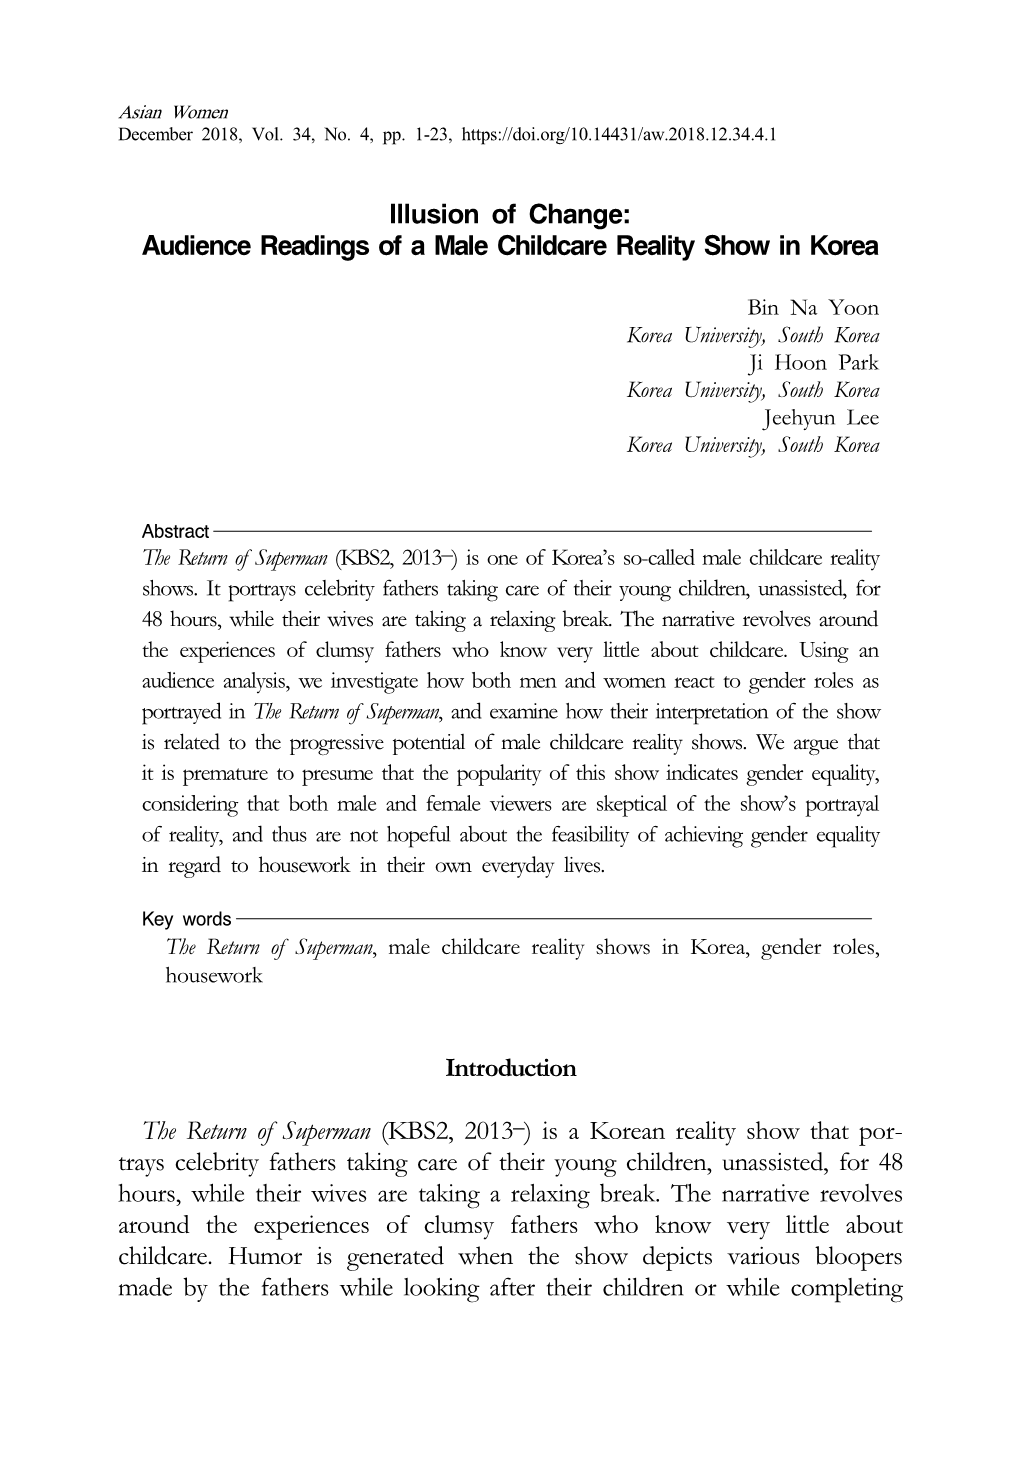 Audience Readings of a Male Childcare Reality Show in Korea